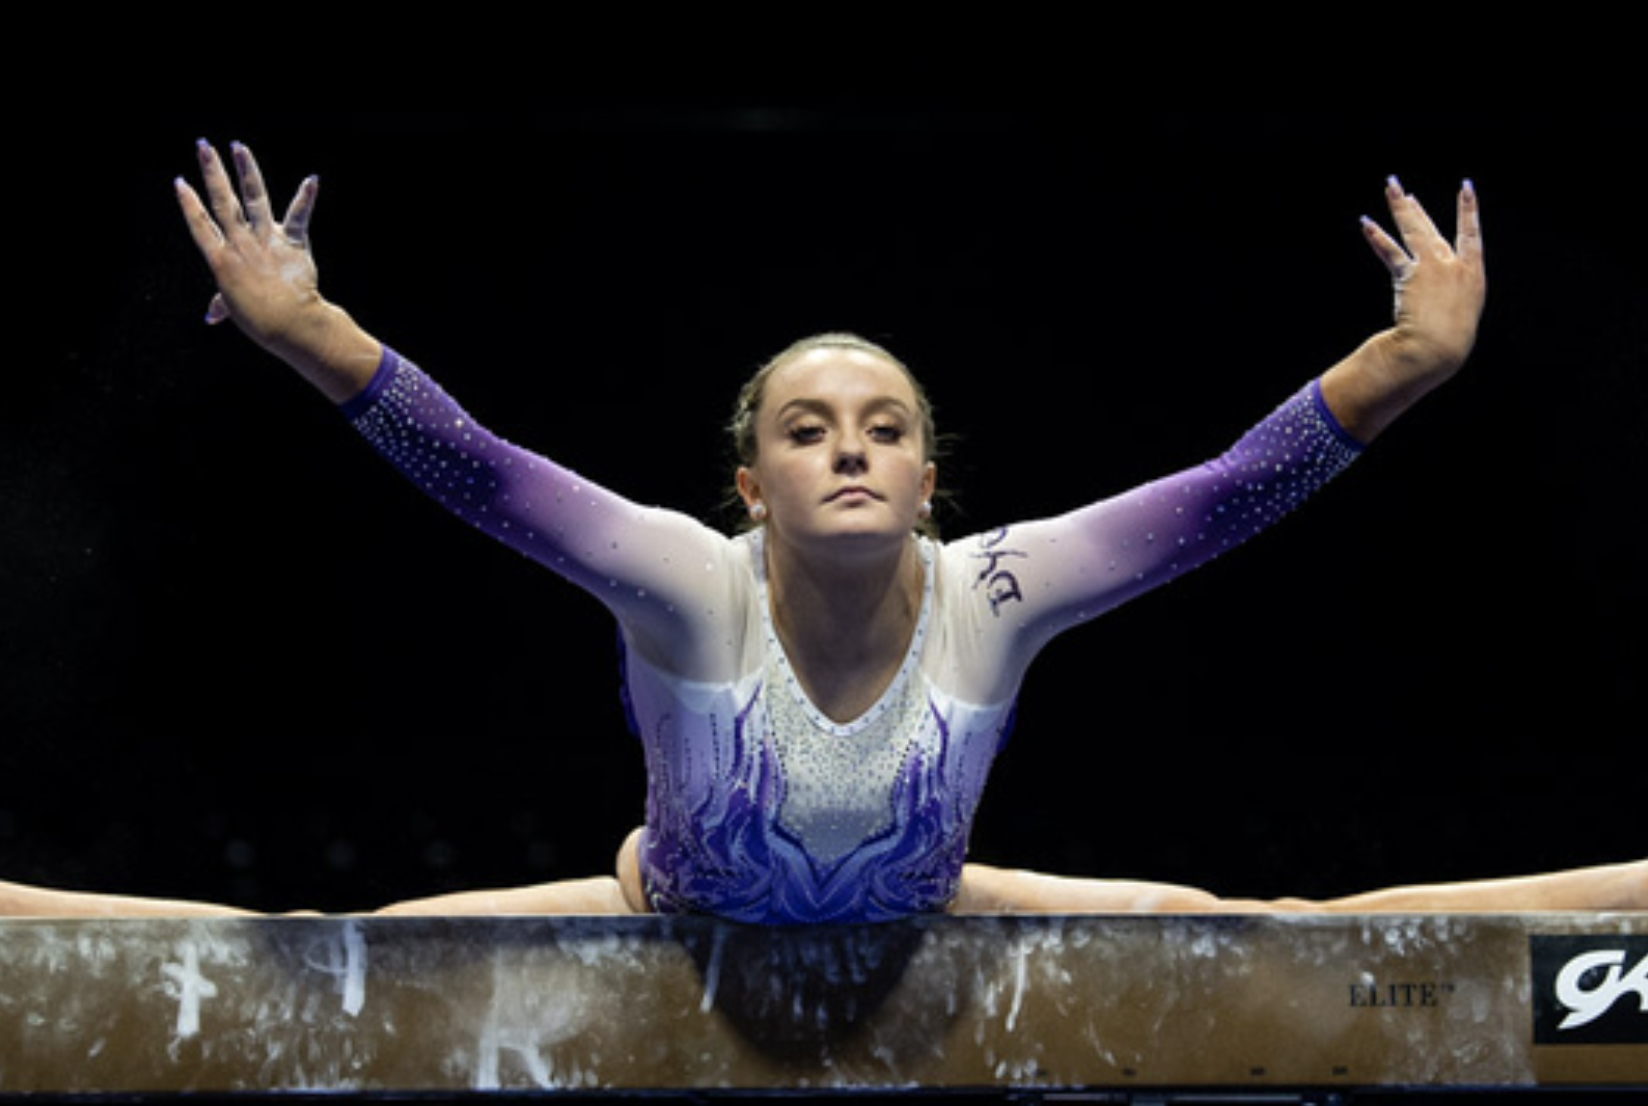 GK Elite Vaults Into Media With Olympic Leotard Debuts